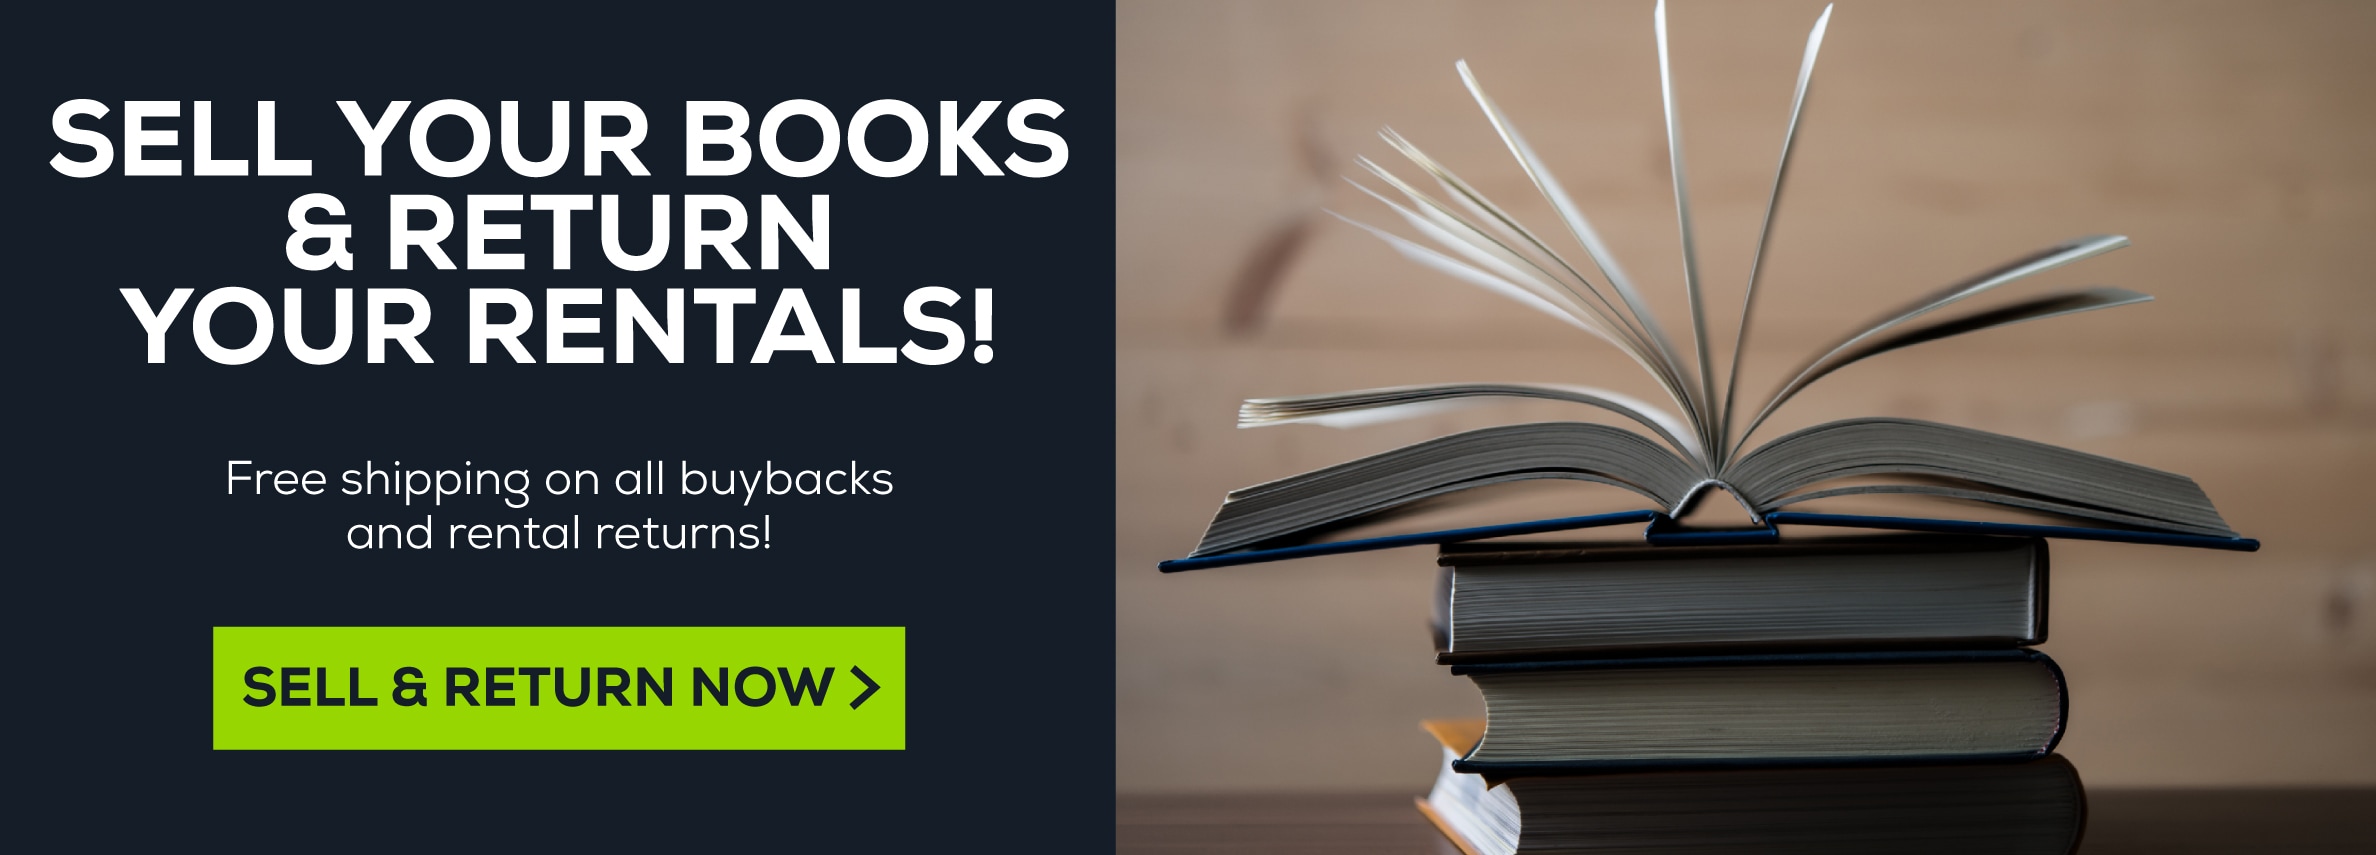 Sell Your Books & Return Your Rentals. Free shipping on all buybacks and rental returns! Sell & Return Now